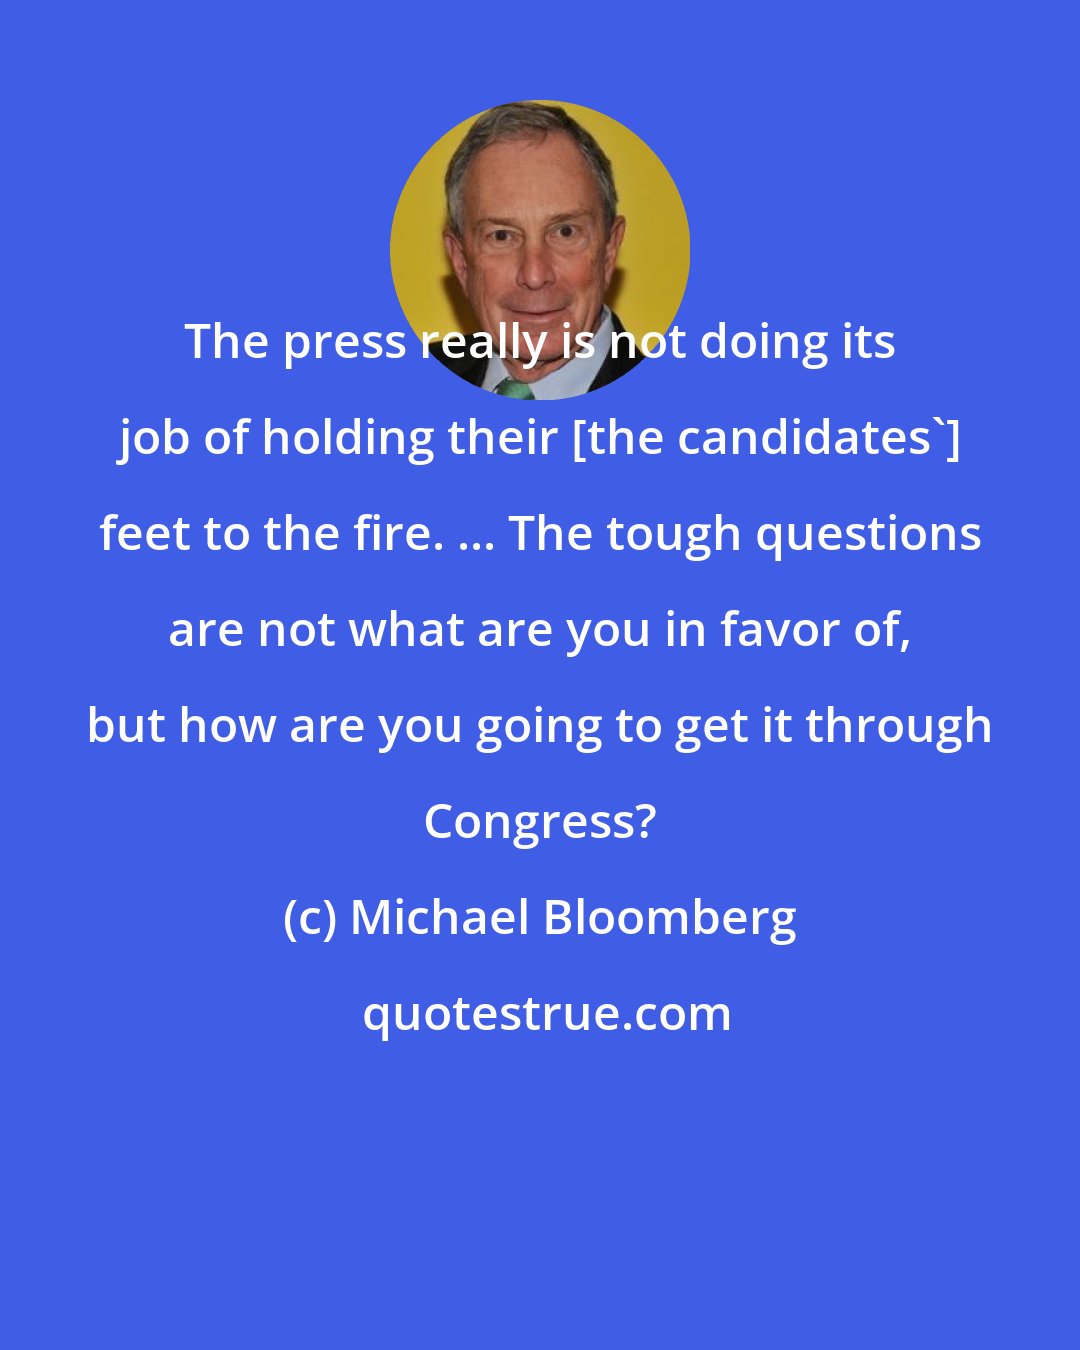 Michael Bloomberg: The press really is not doing its job of holding their [the candidates'] feet to the fire. ... The tough questions are not what are you in favor of, but how are you going to get it through Congress?